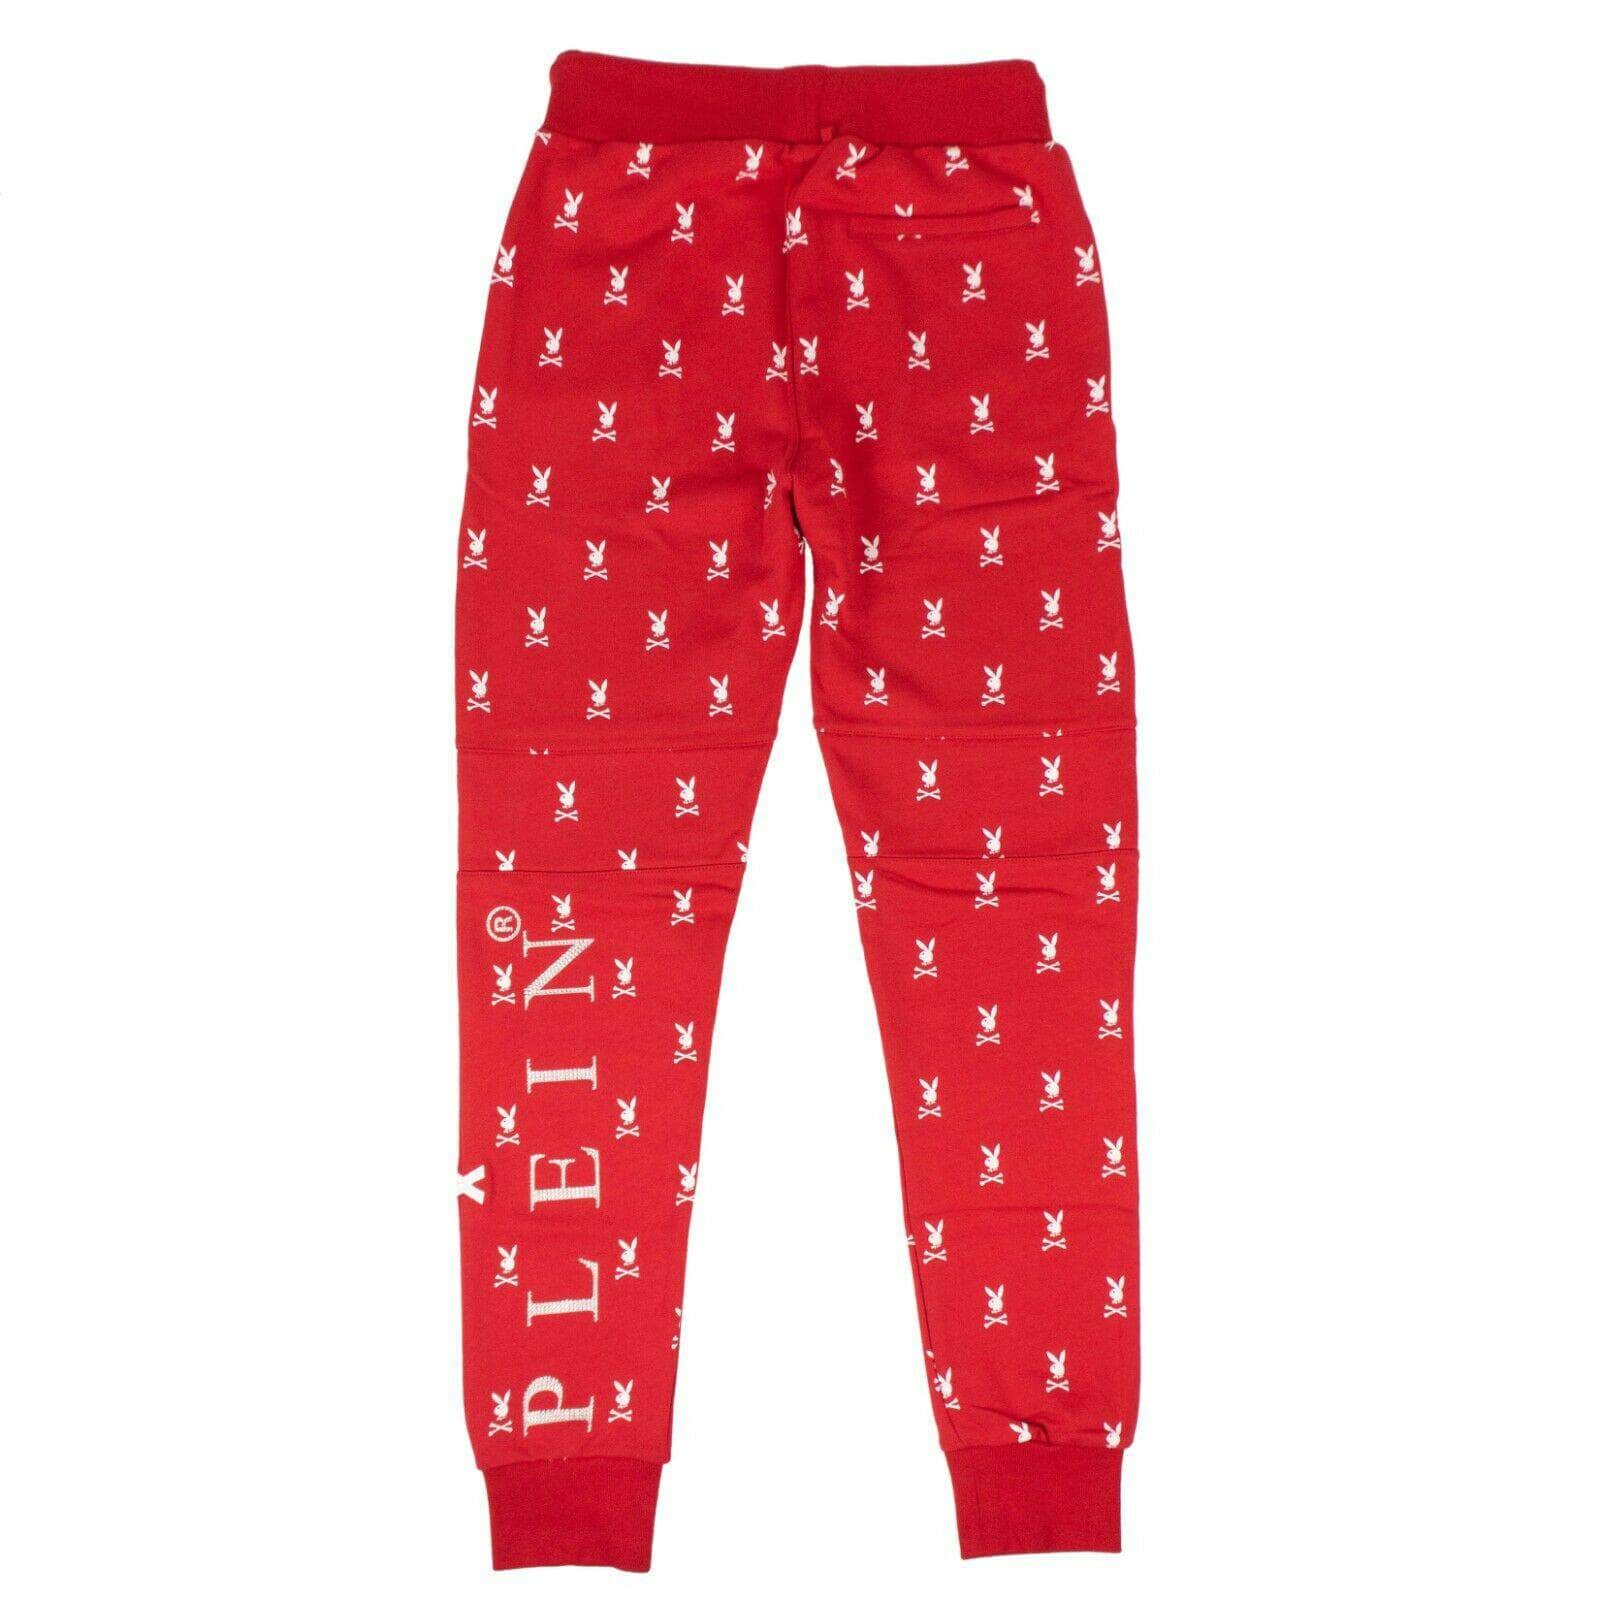 Philipp Plein 250-500, channelenable-all, chicmi, couponcollection, gender-mens, main-clothing, mens-joggers-sweatpants, mens-shoes, philipp-plein, size-3xl, size-4xl, size-xl, size-xxl PHILIPP PLEIN x PLAYBOY Red Skull Bunny Print Jogging Sweatpants